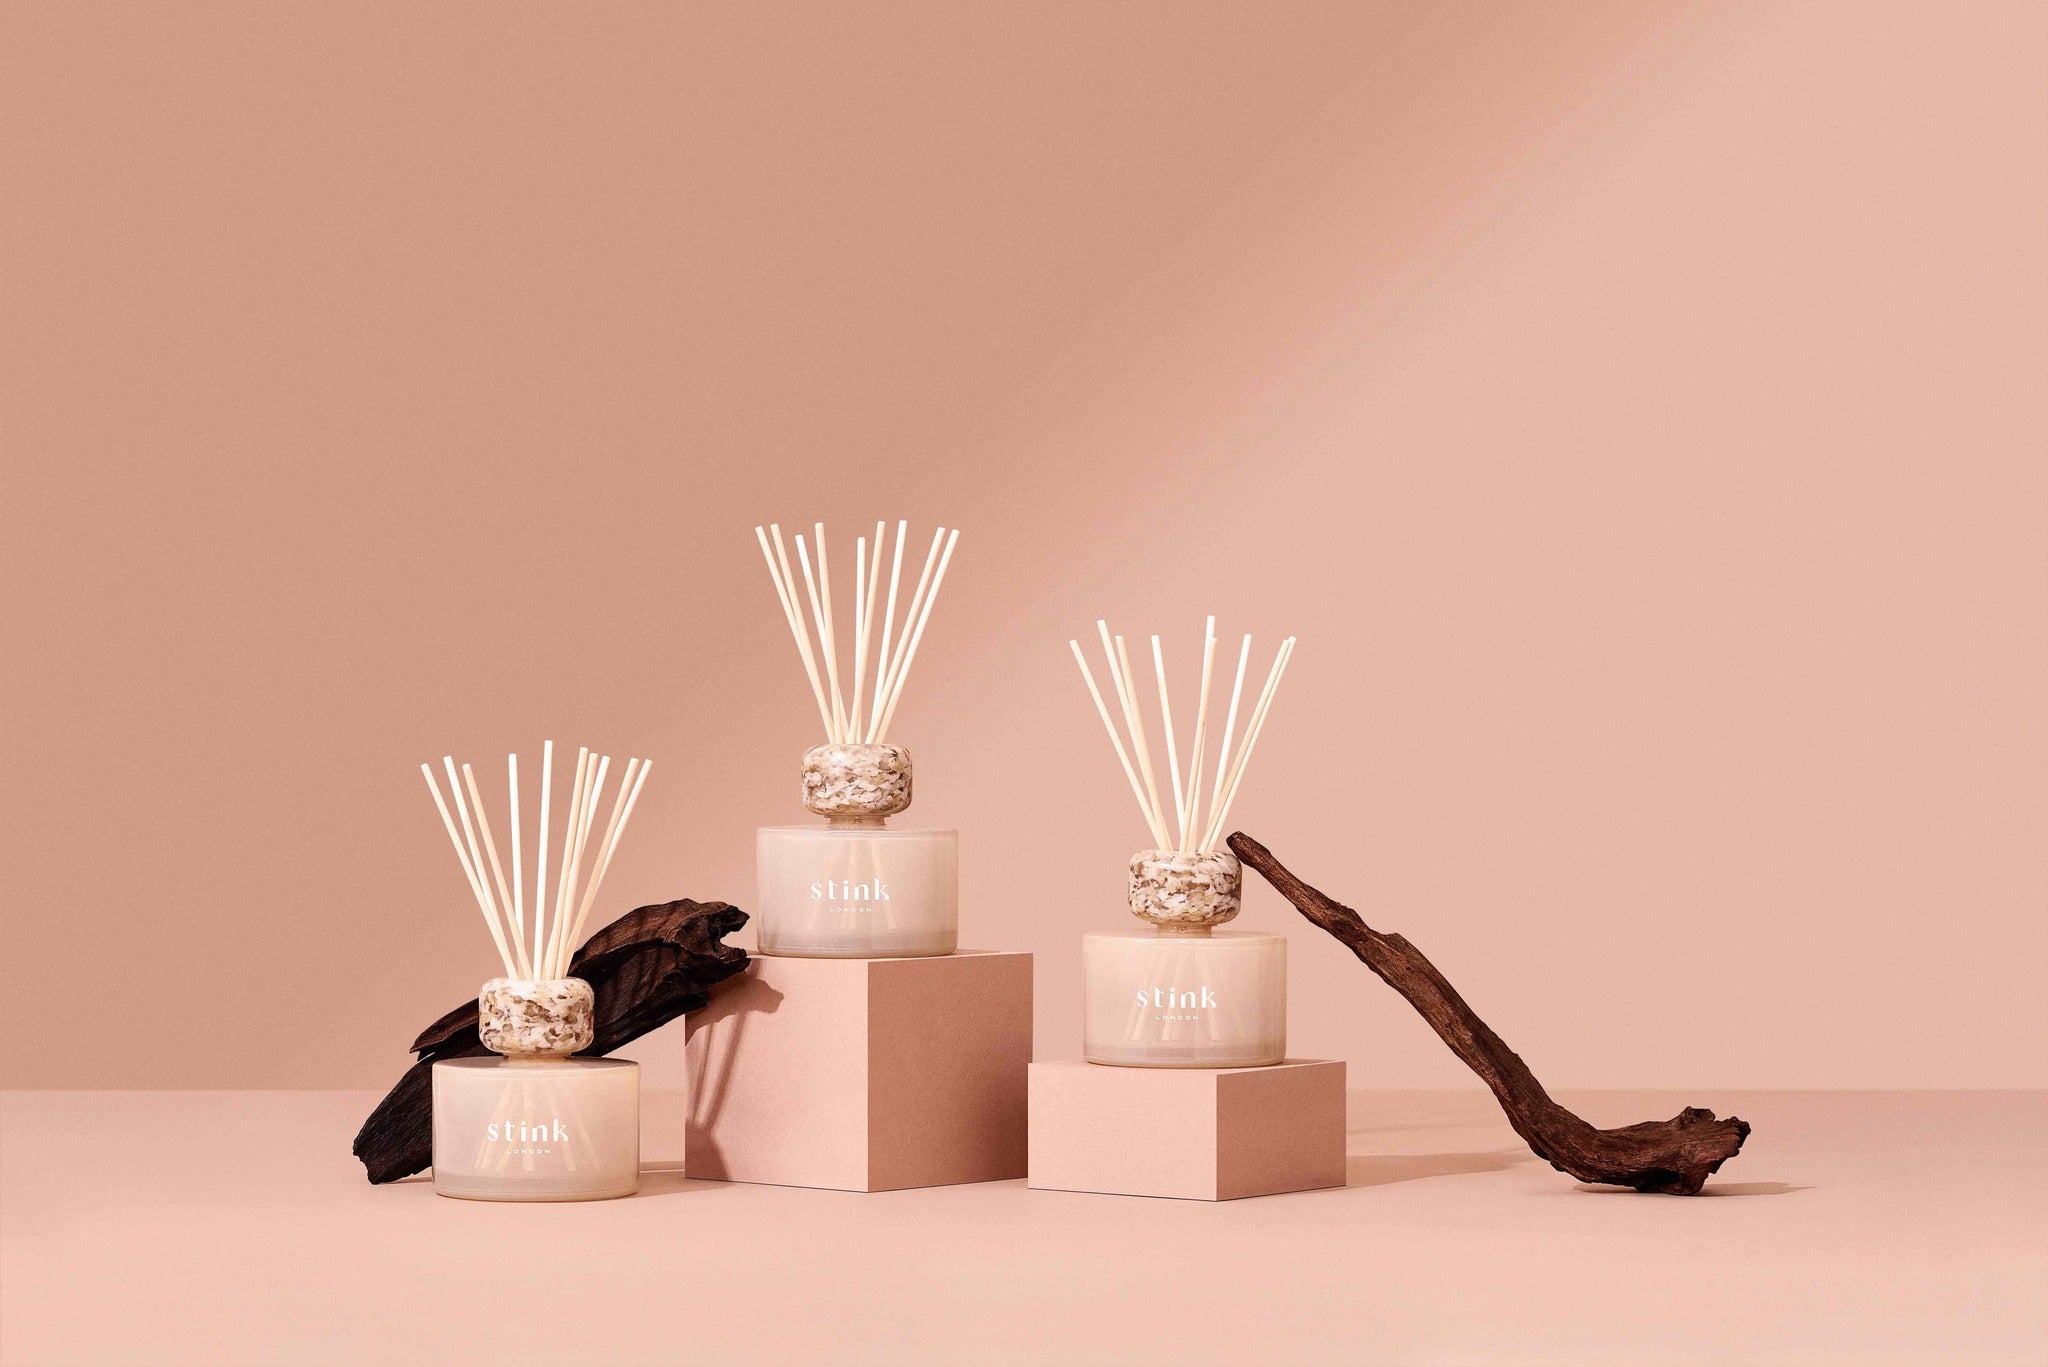 One diffuser for life: reed difffusers you can refill forever